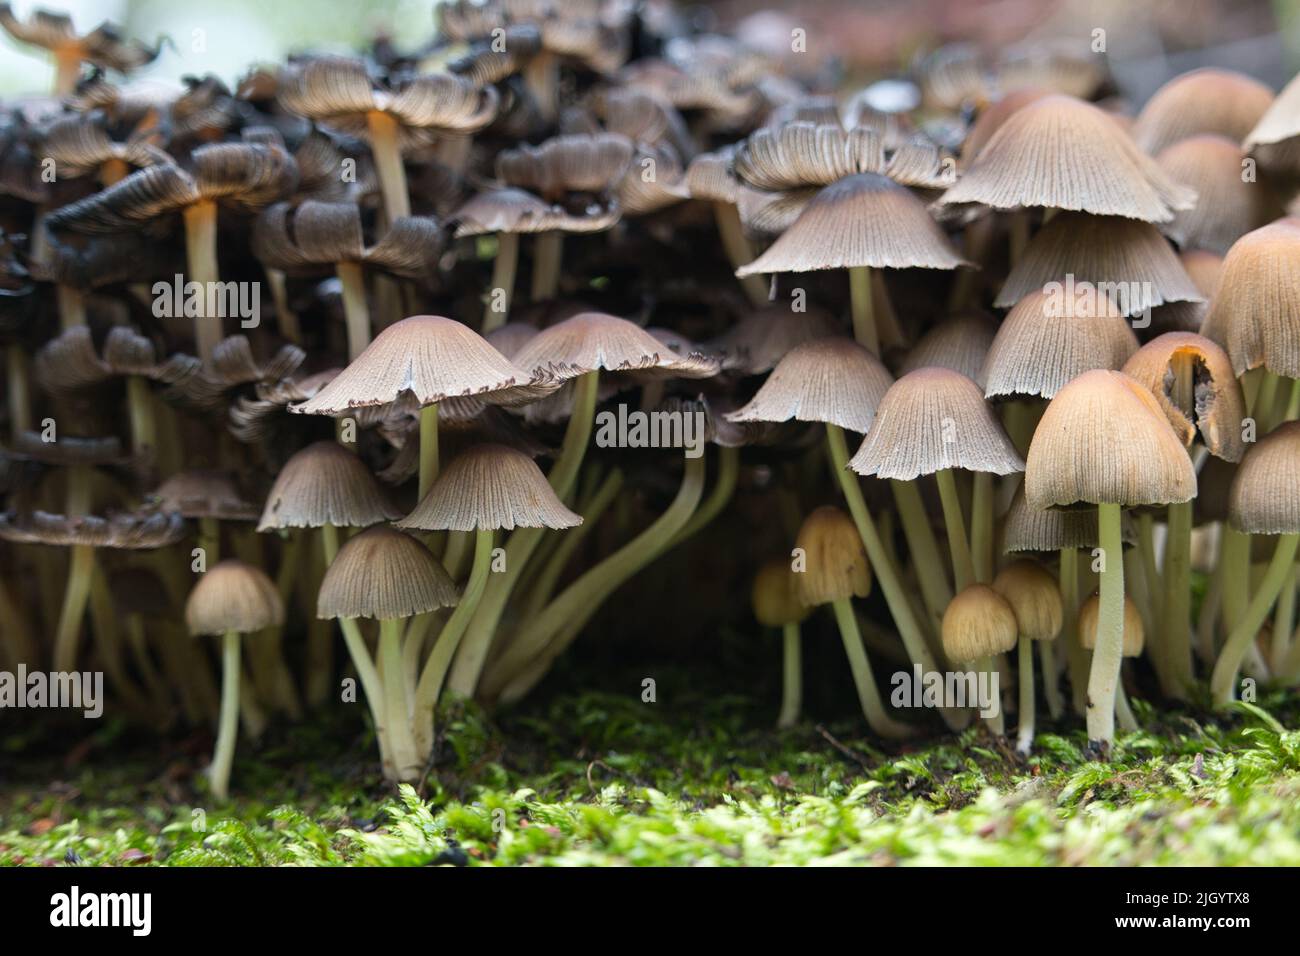 Group or small brown mushrooms growing on moss Stock Photo